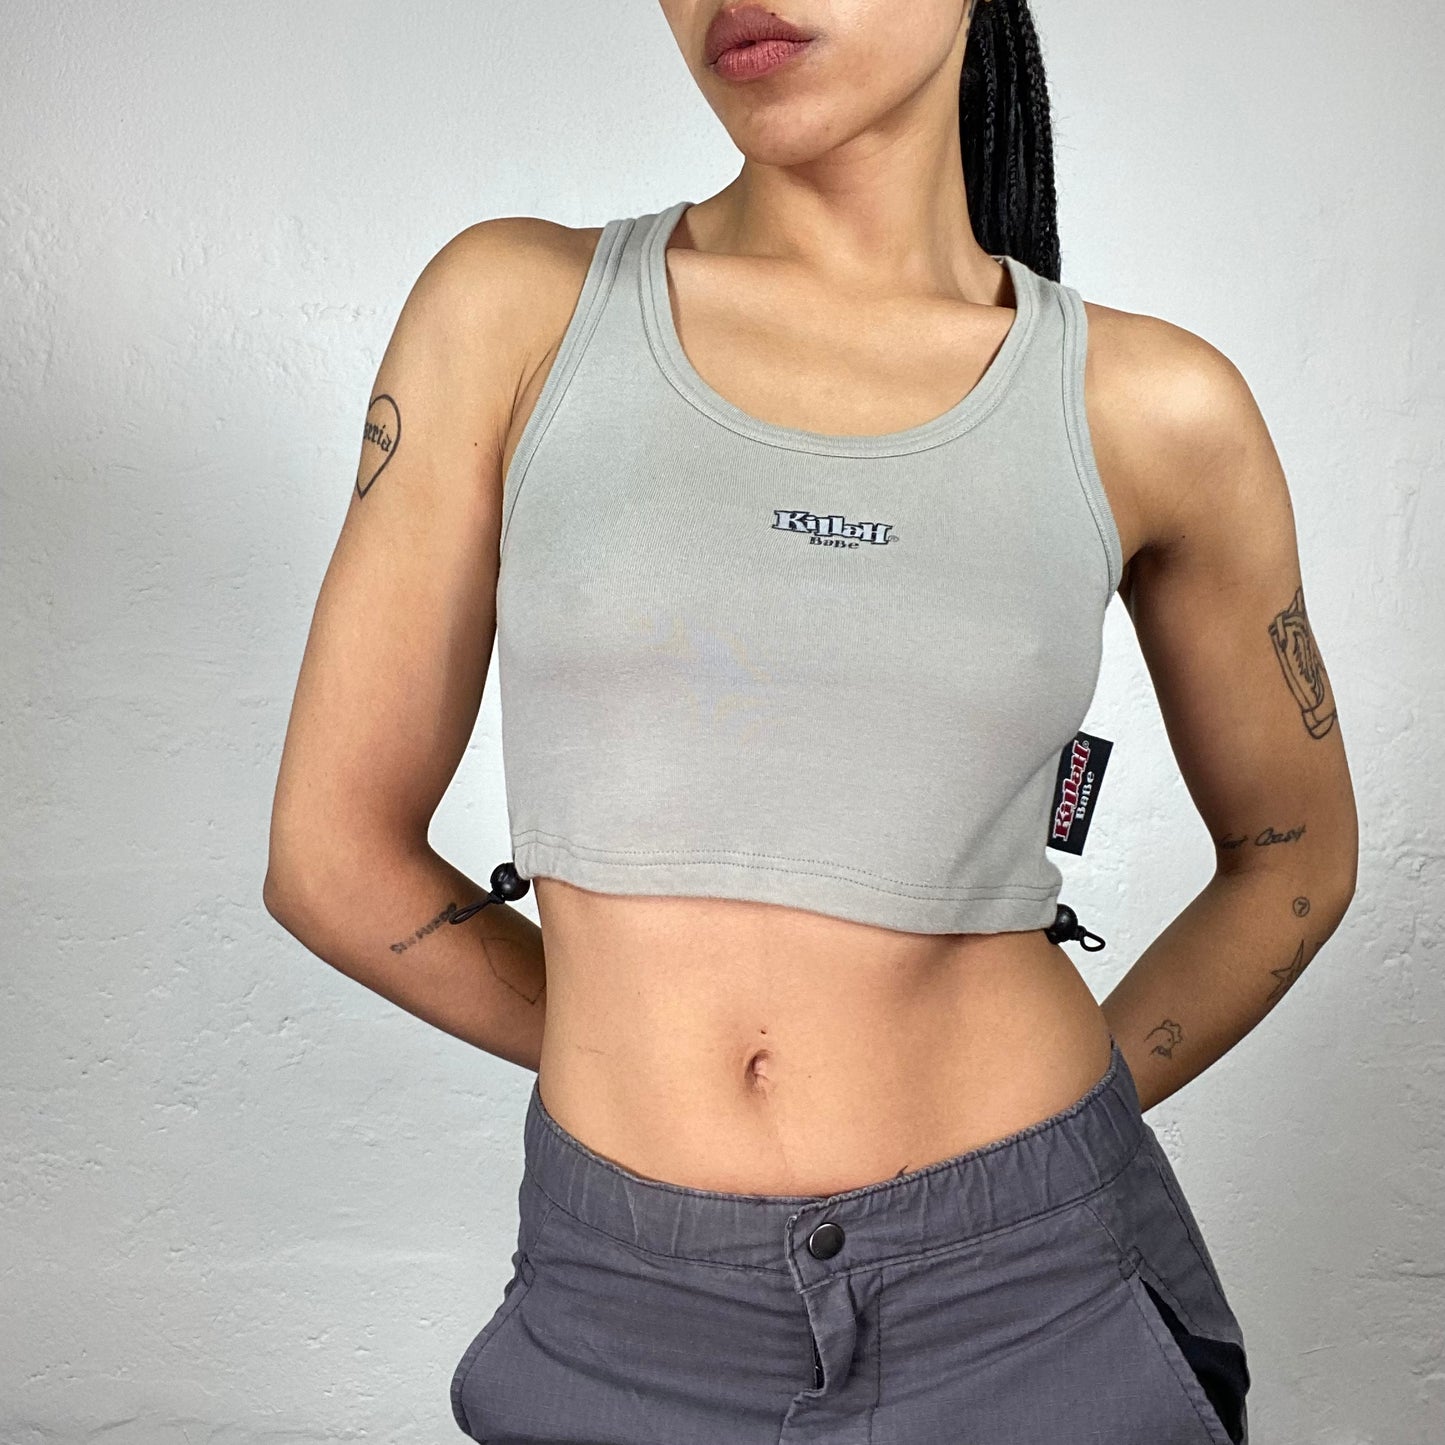 Vintage 2000's Sporty Light Warm Grey Cropped Tank Top with Killah Typo Embroidery (S)